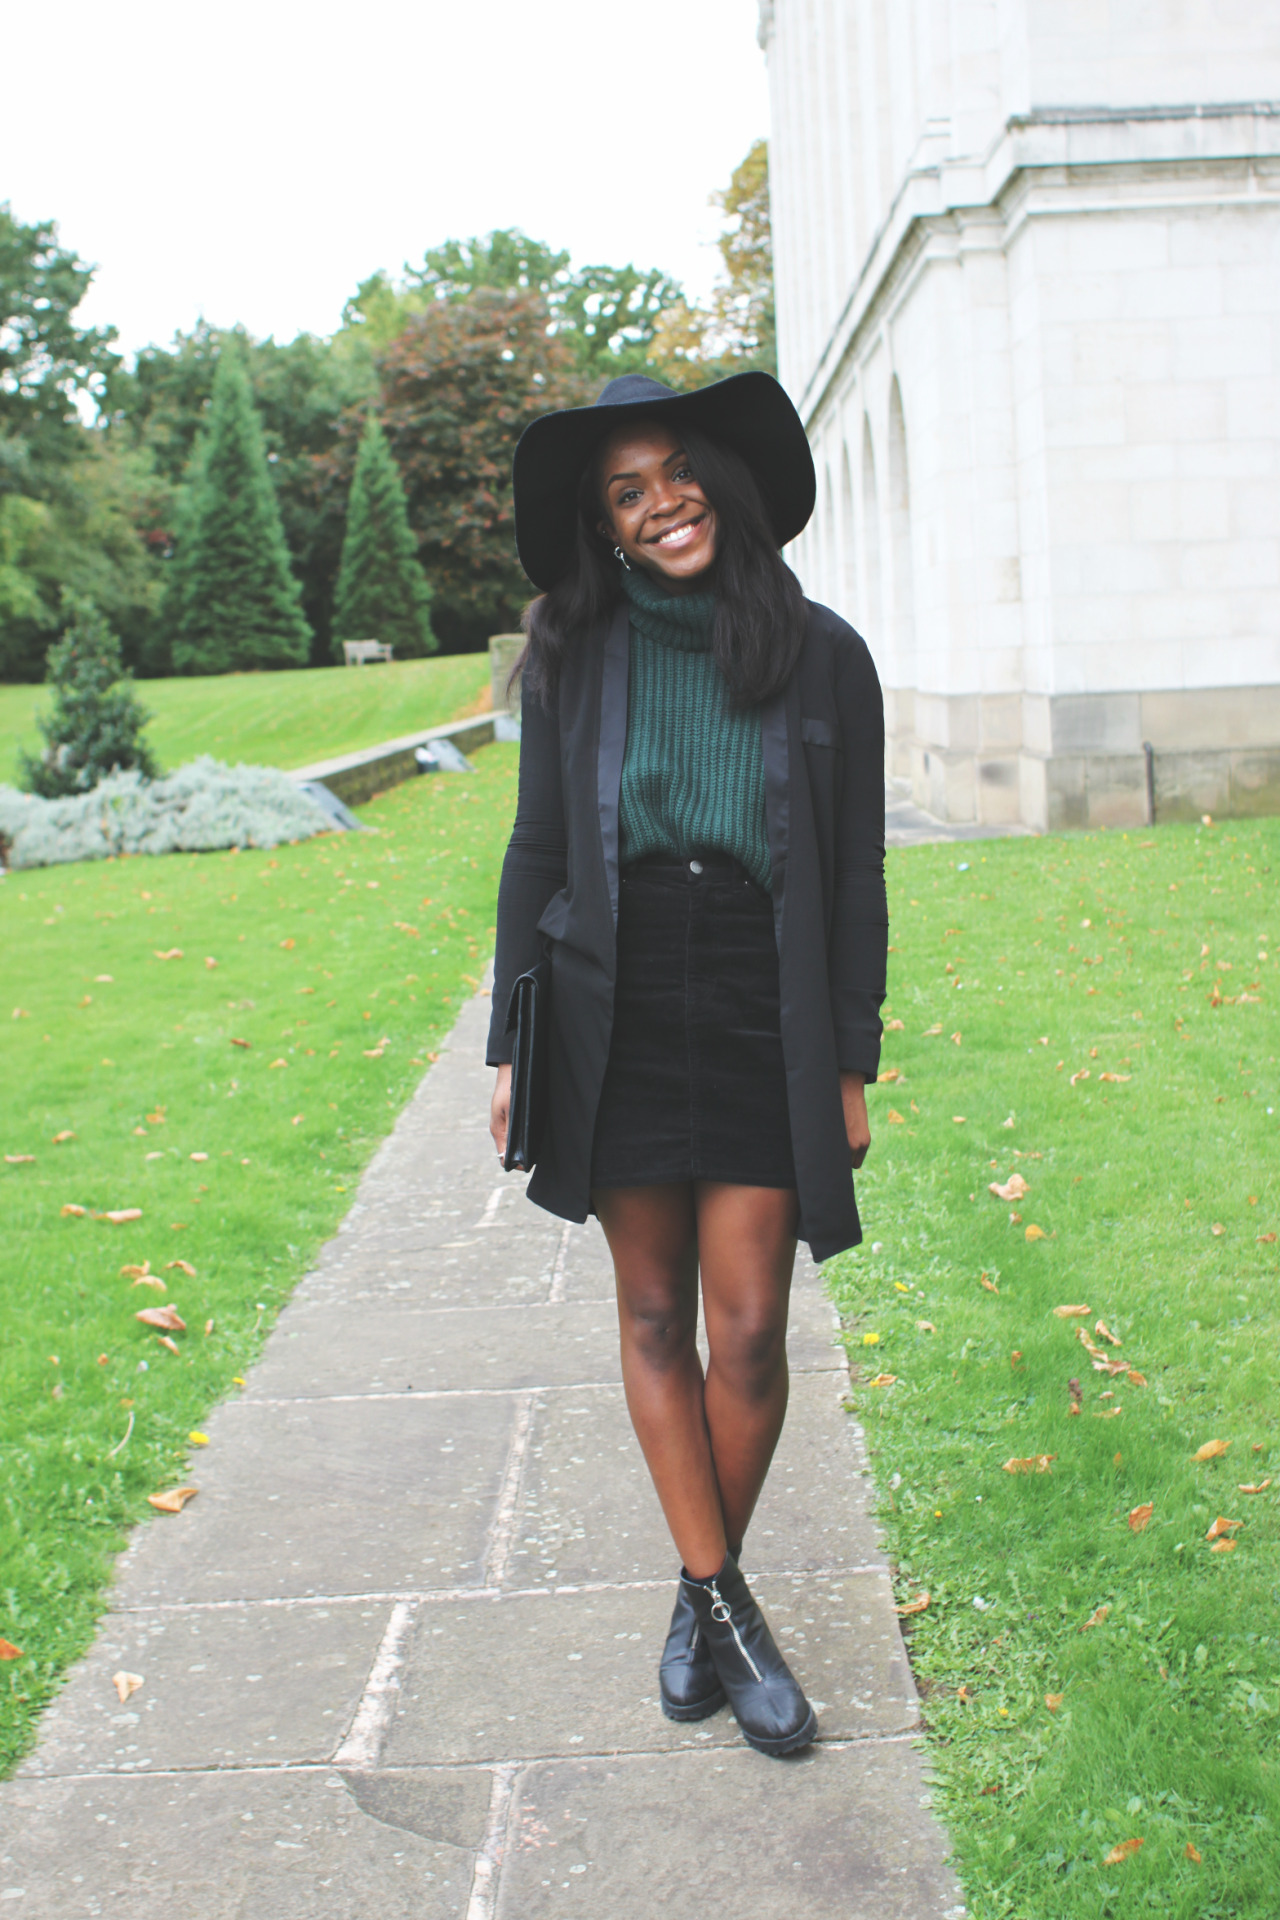 Shope Delano, 18, UKhttp://londons-closet.com Photographed by Dilara Schultheis